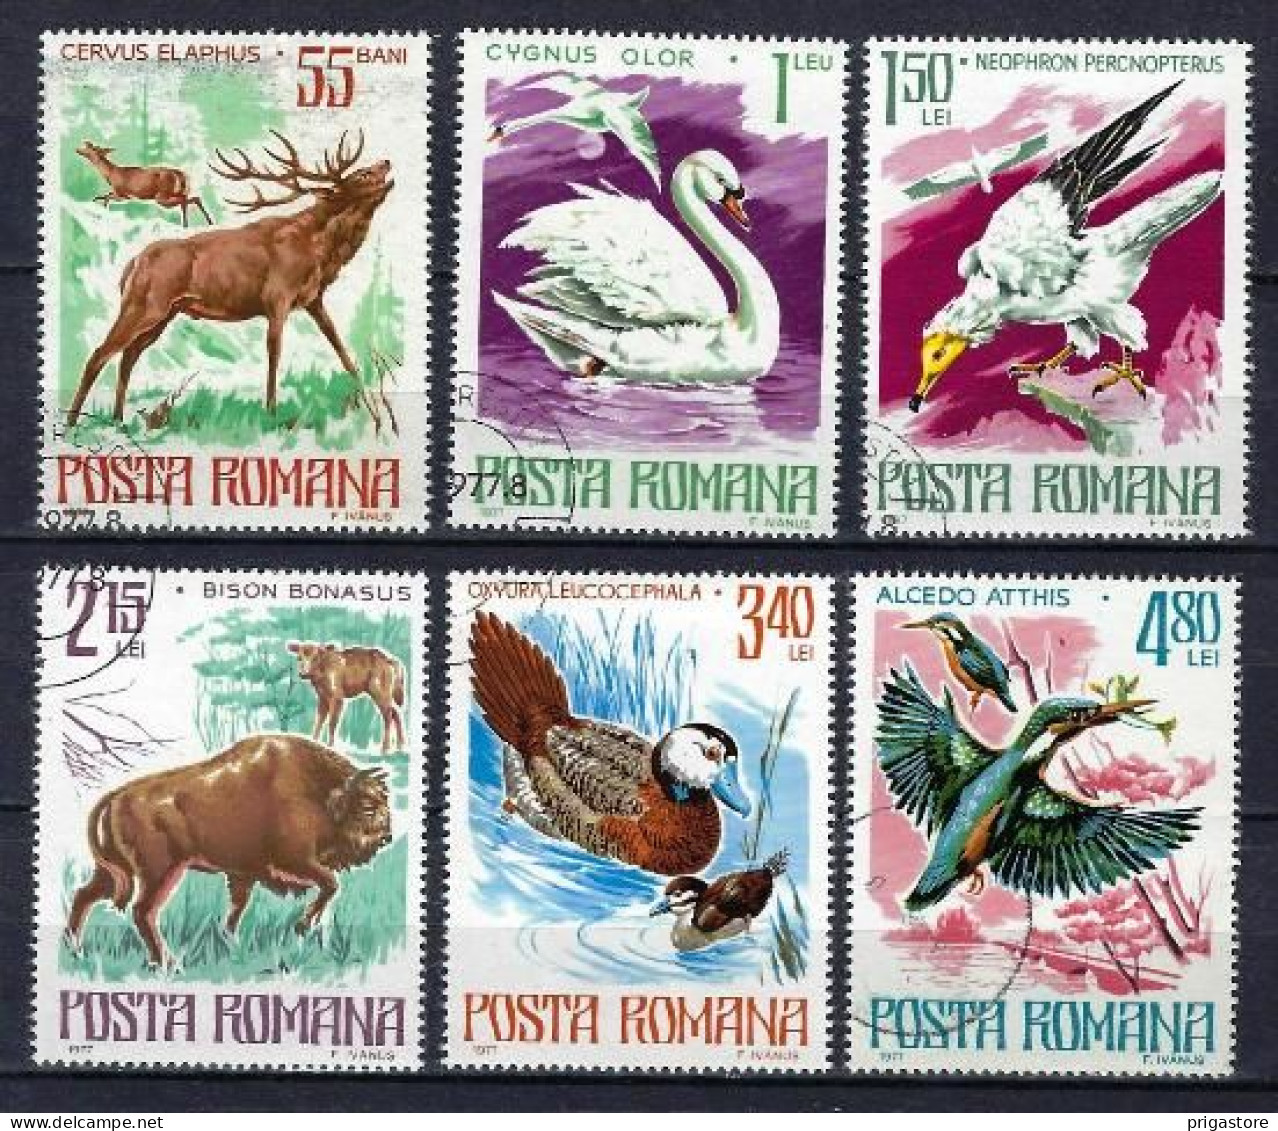 Roumanie 1977 Animaux Sauvages (58) Yvert N° 3021 à 3026 Oblitéré Used - Used Stamps